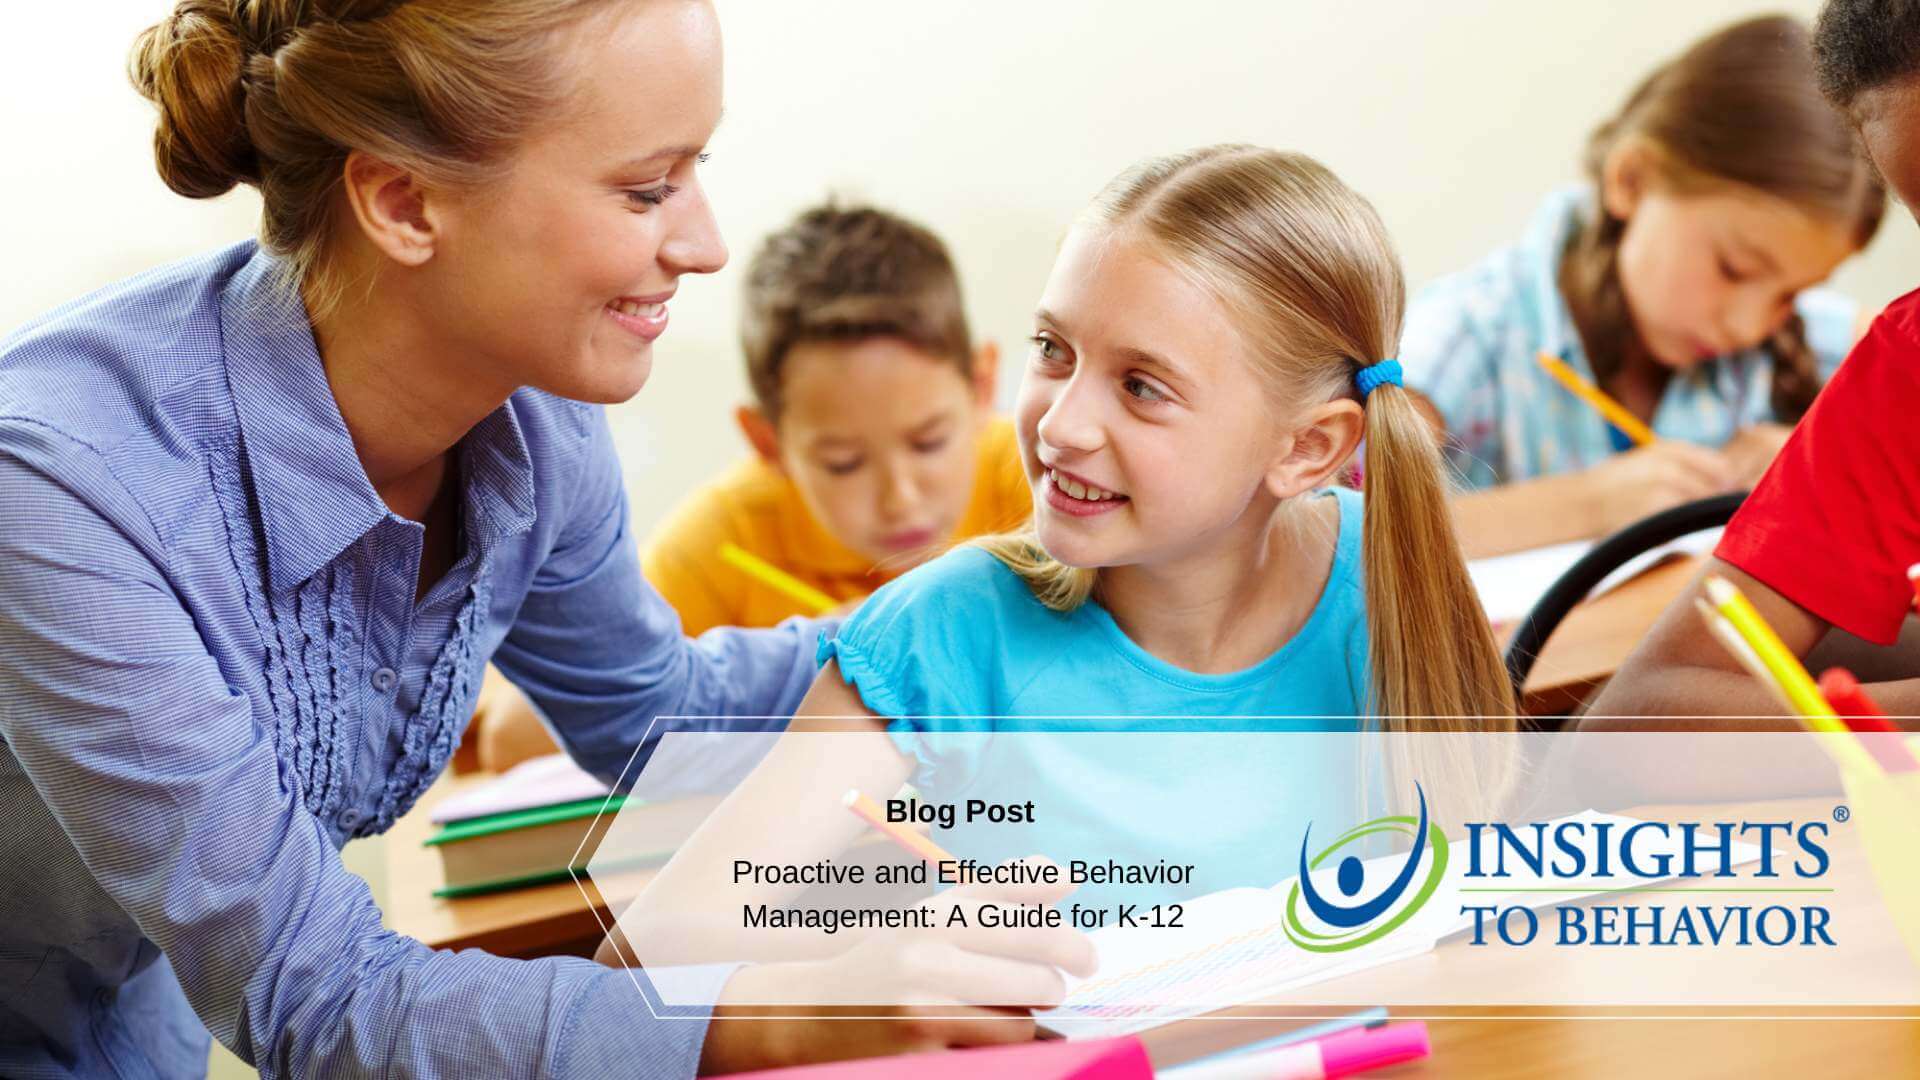 Proactive and Effective Behavior Management: A Guide for K-12